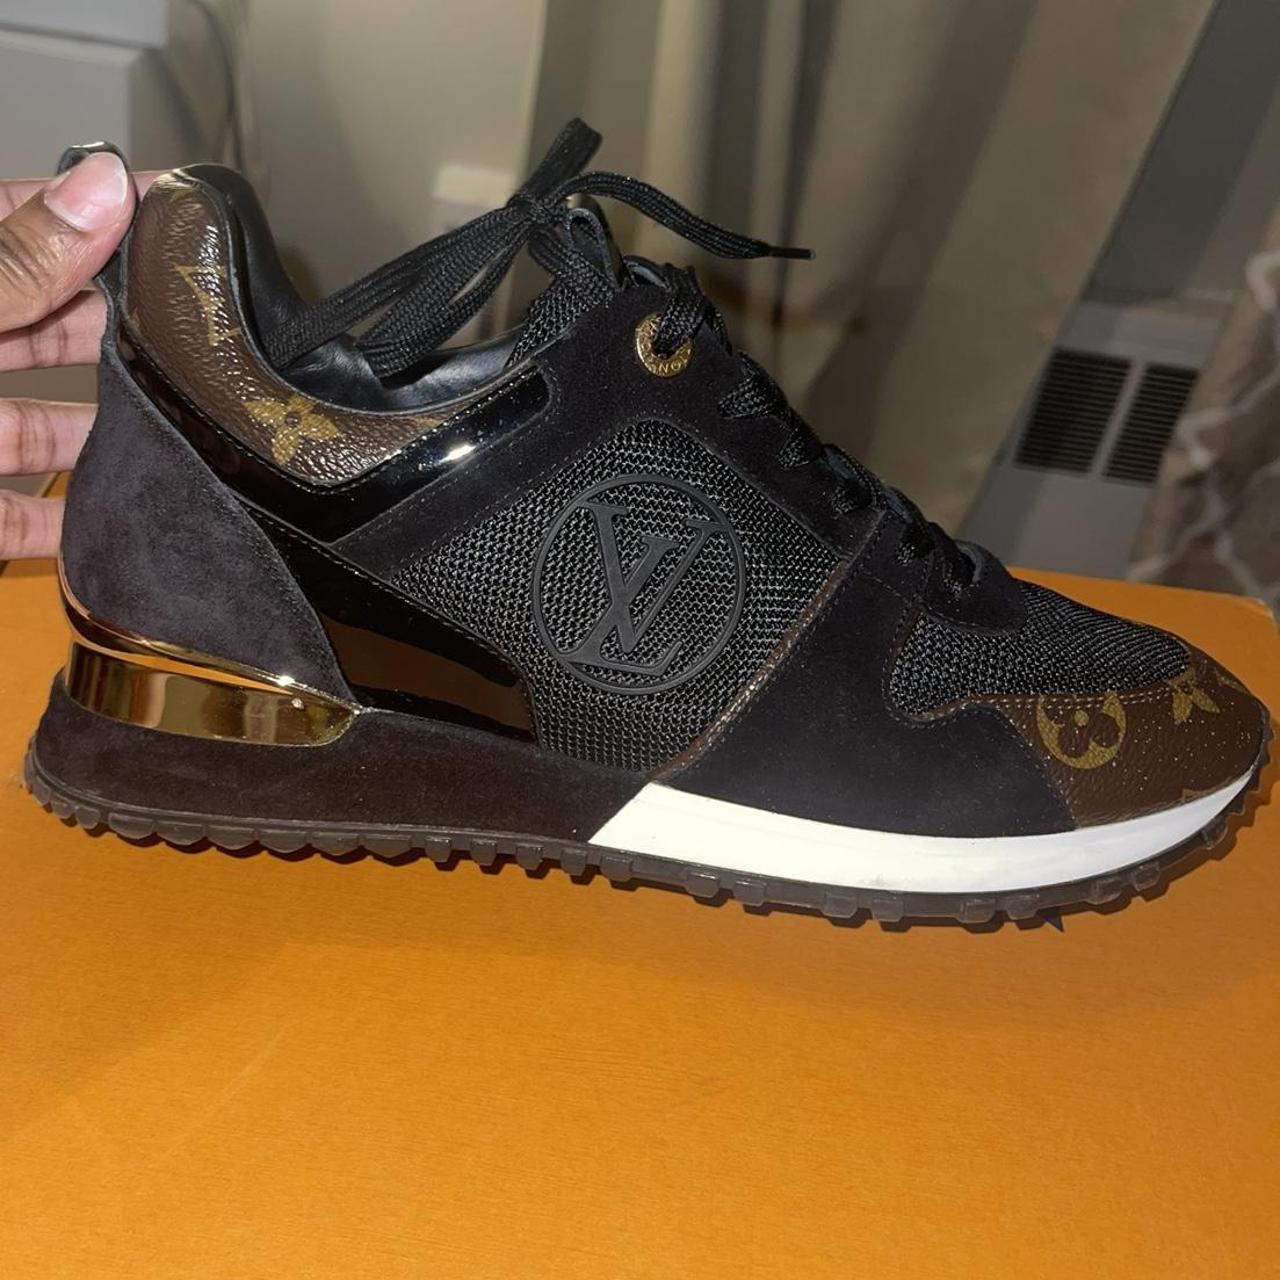 Louis Vuitton sneakers in very good conditions size 7 - Depop